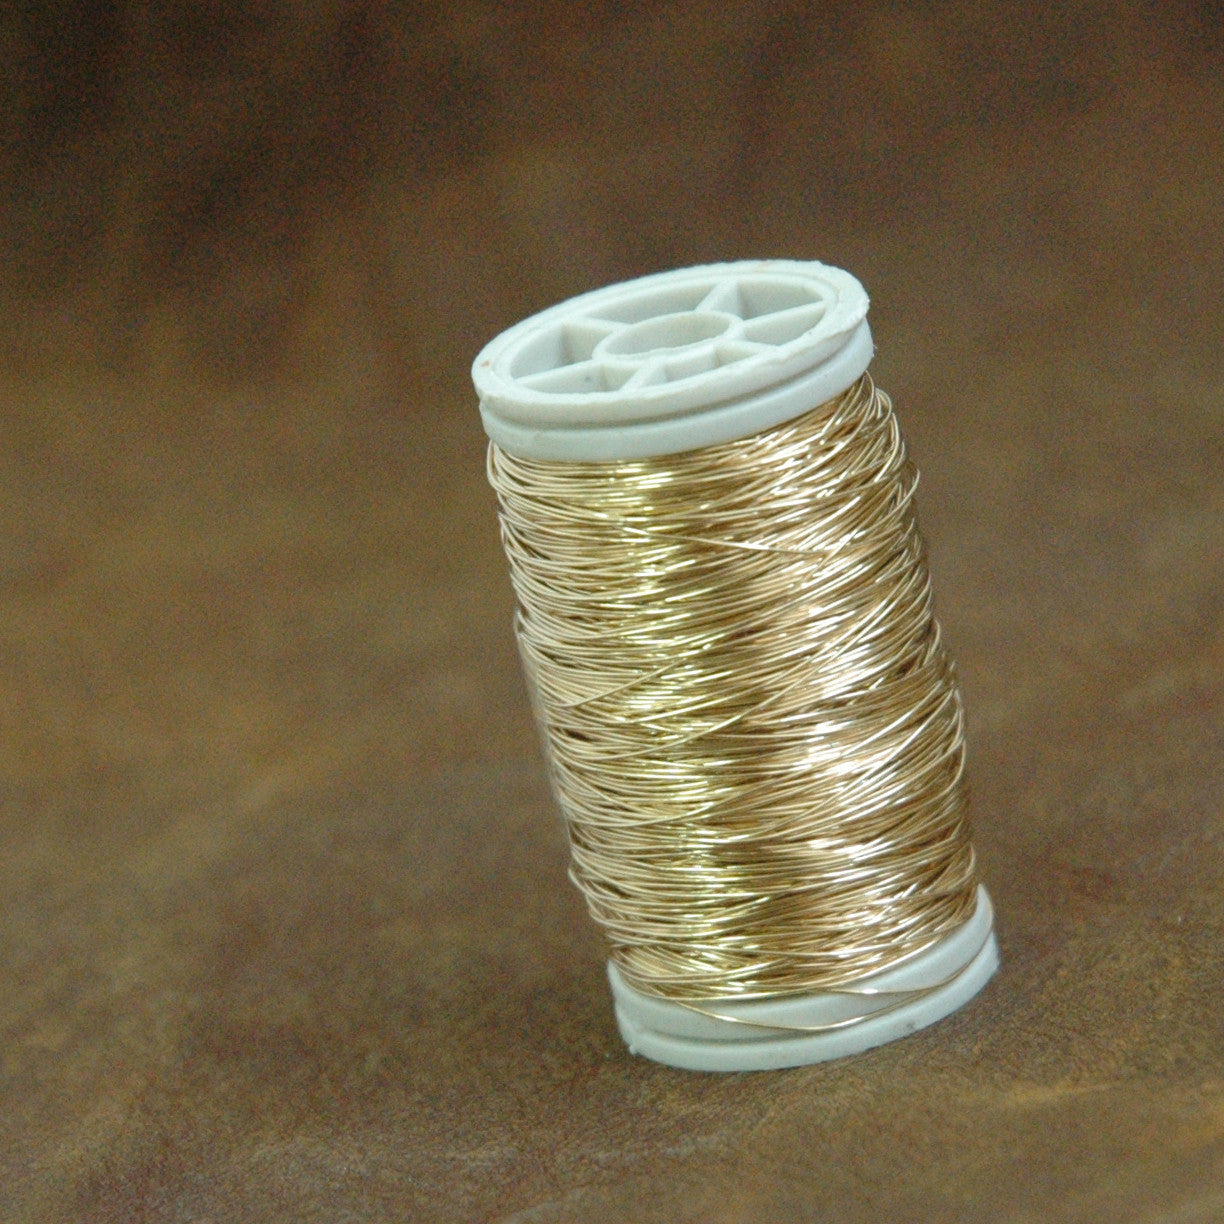 Gold filled wire , dead soft gold filled , 28gauge , wire crochet supplies,  gold wire, 80ft 26 yard